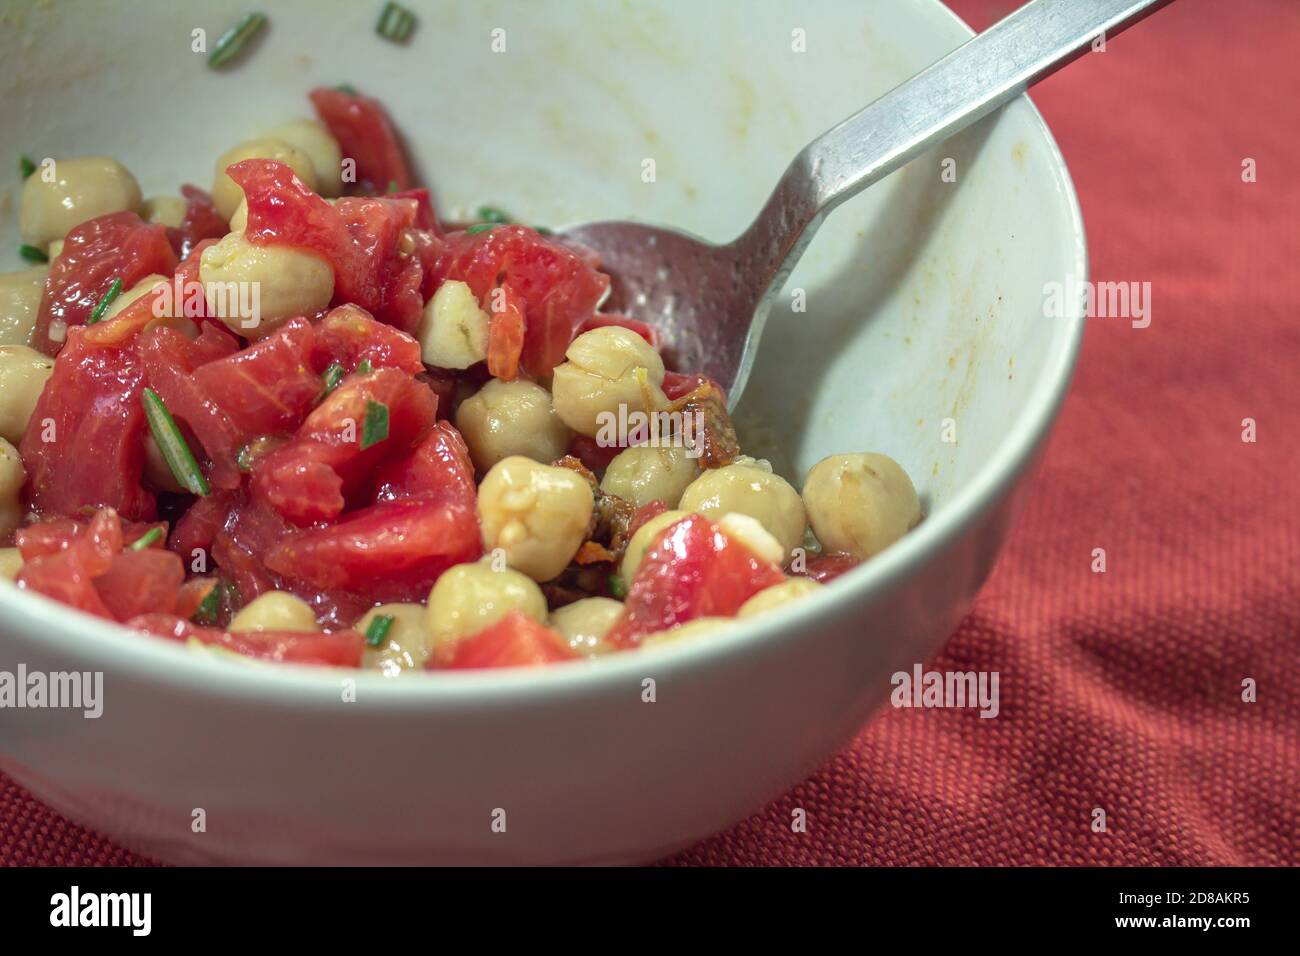 Detail on a white bowl with a chickpea, tomato and rosemary salad inside Stock Photo